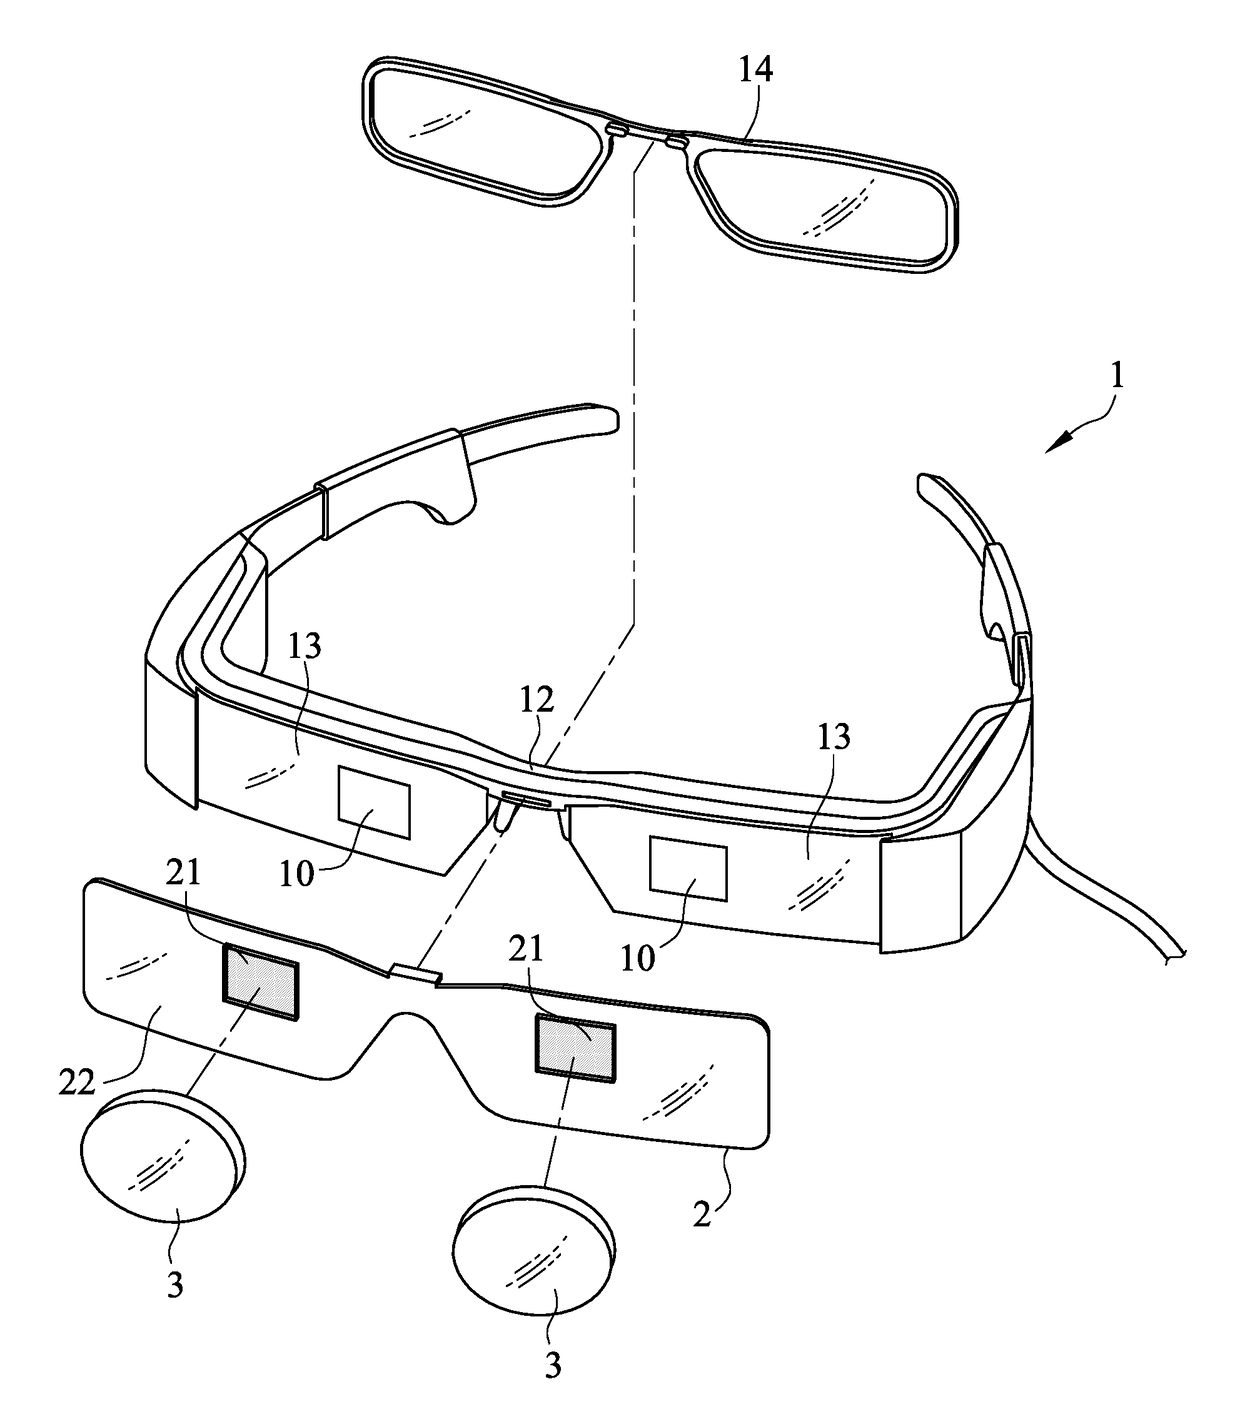 Eye-protective shade for augmented reality smart glasses